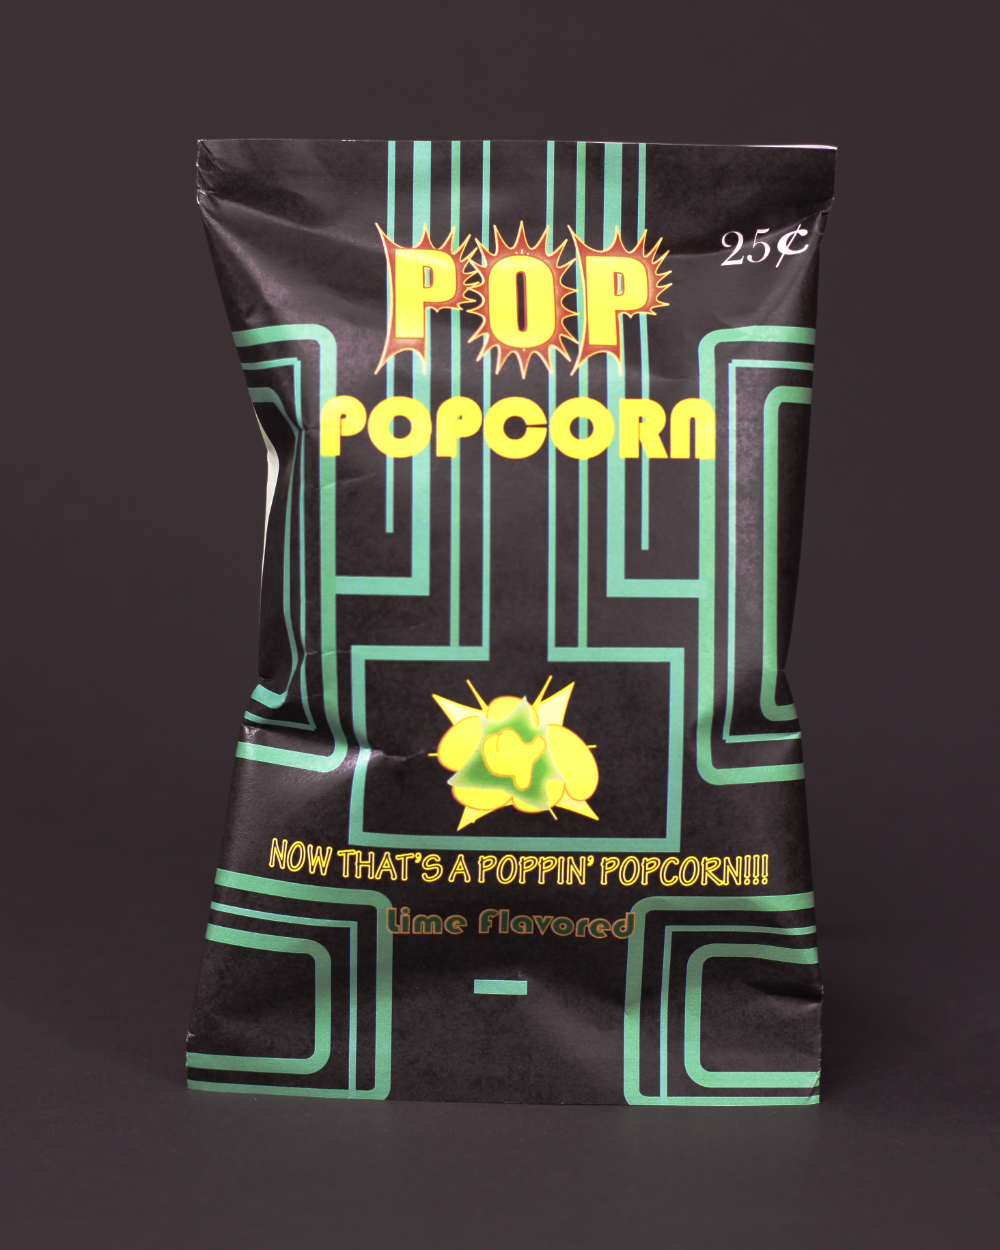 thumbnail of Popcorn Bag by Angelica Perez. date: 2011